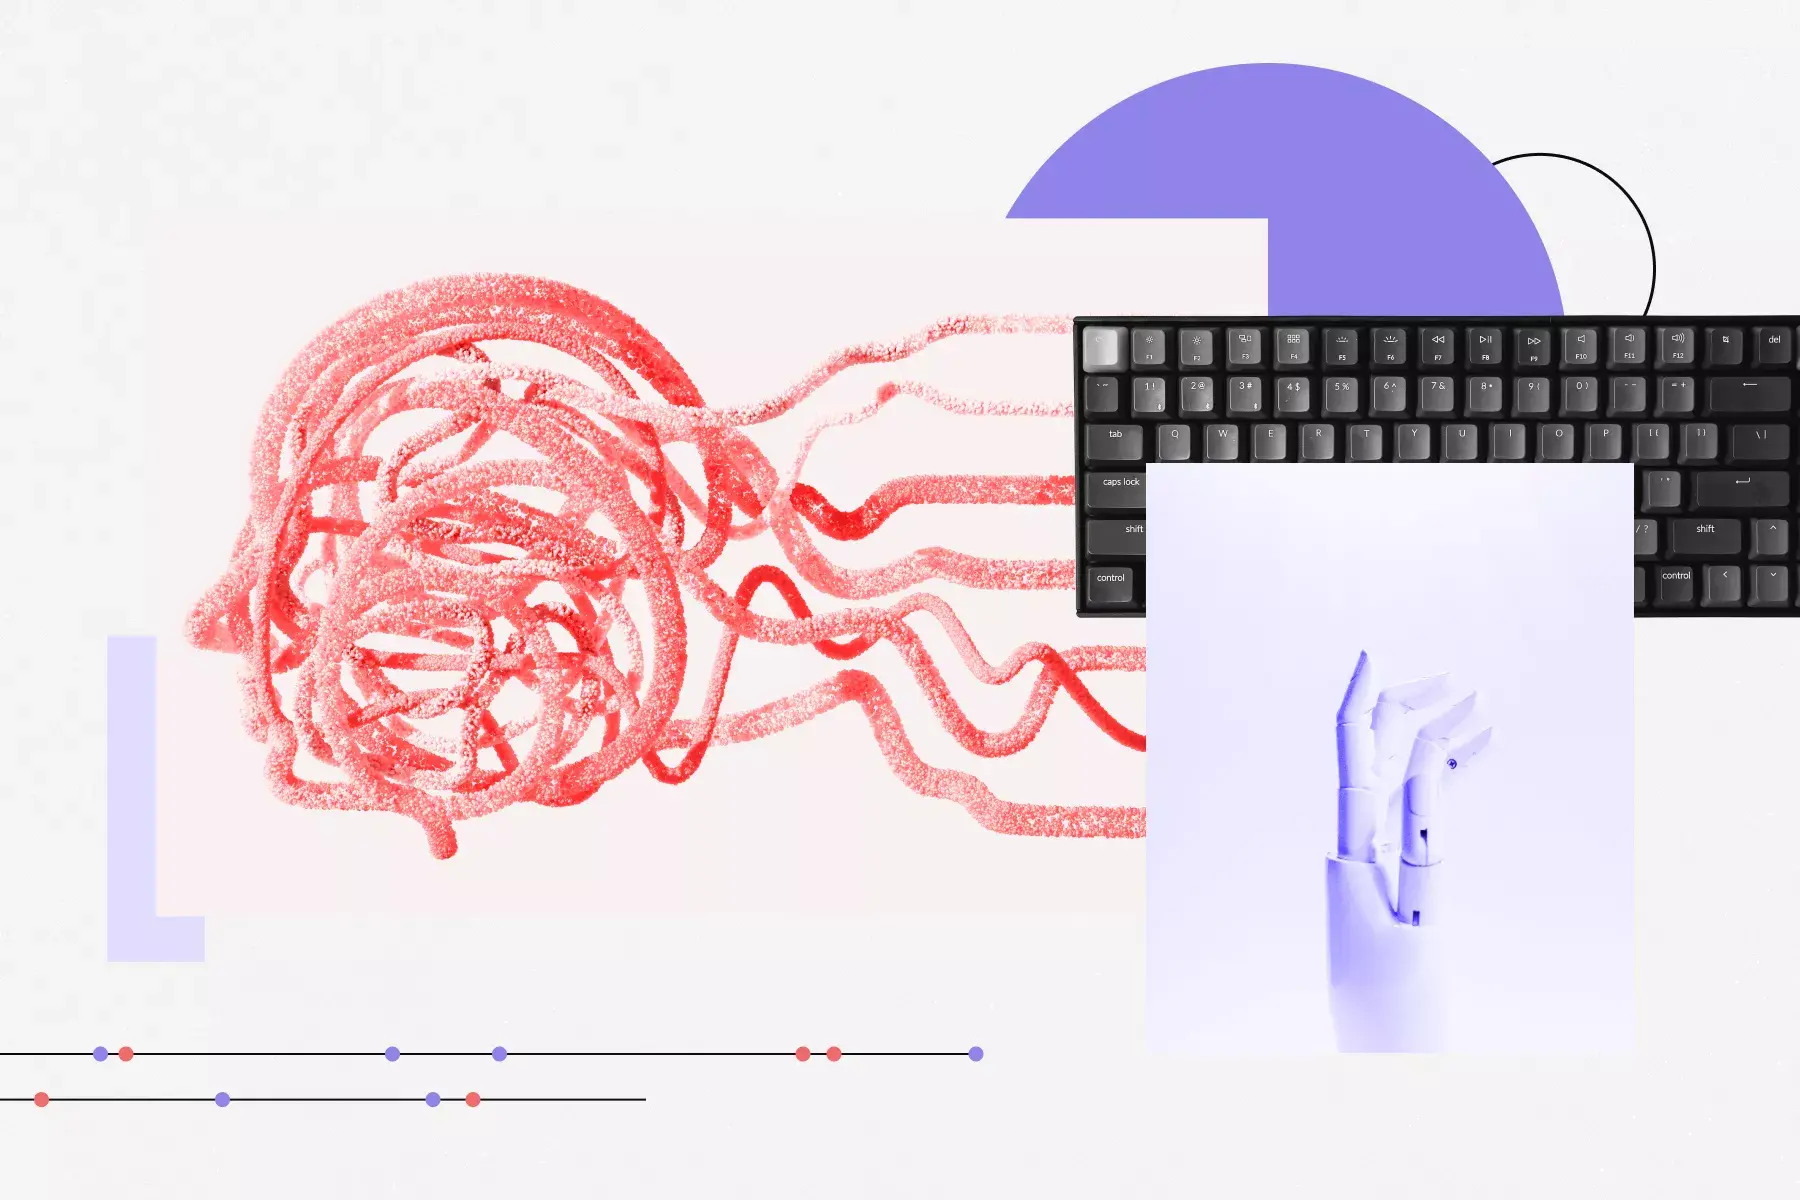 Card image for article on mastering change management in the AI age. Features imagery like a keyboard and mechanical hand.